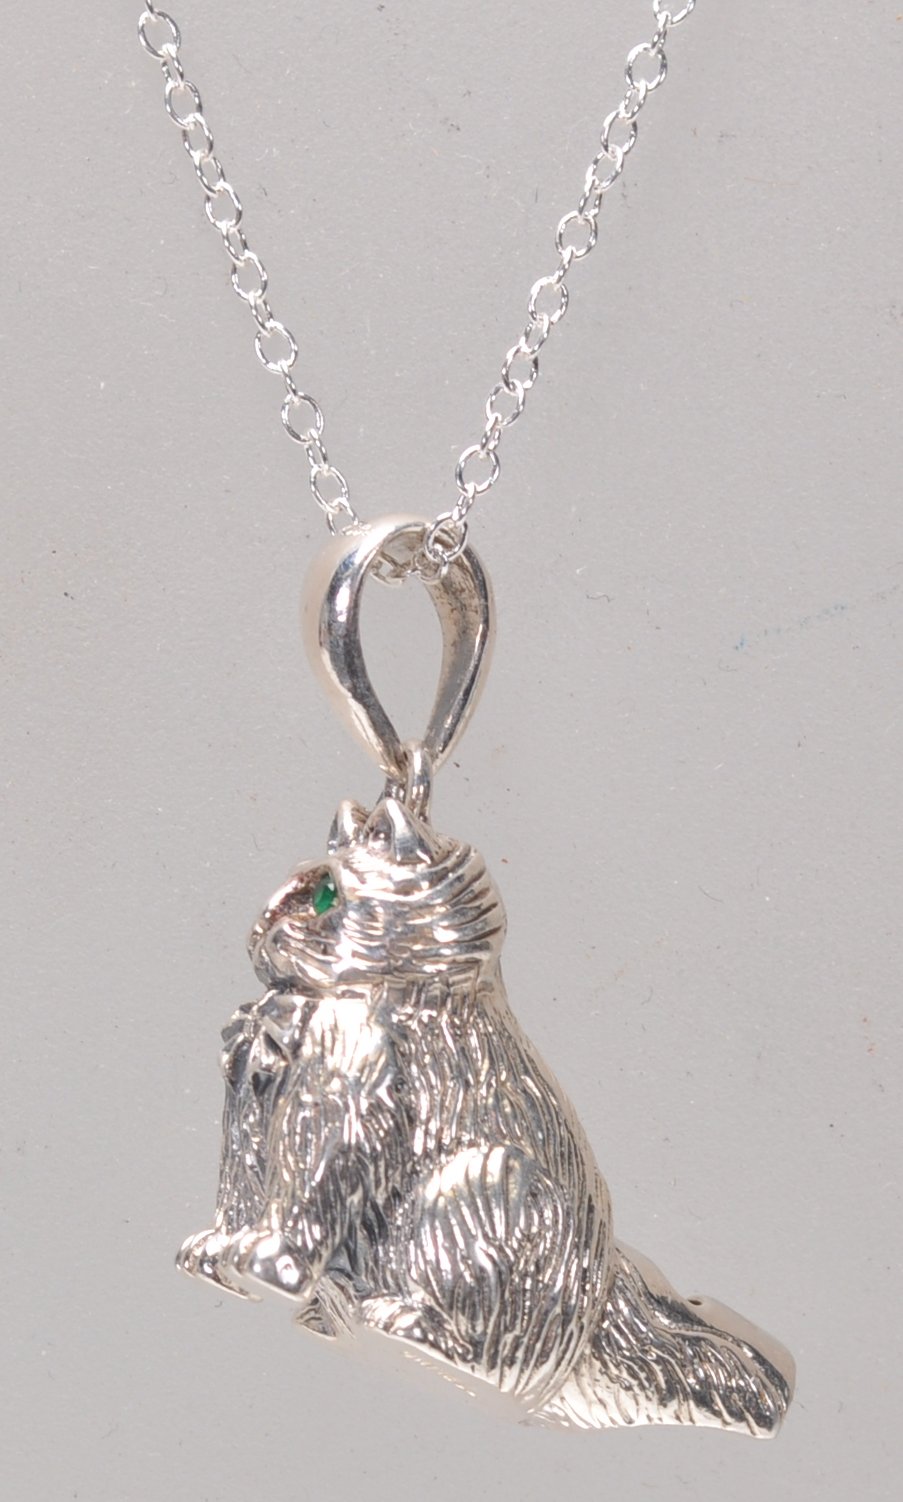 A stamped sterling silver pendant whistle in the form of a cat being set with green stone eyes and - Image 3 of 5